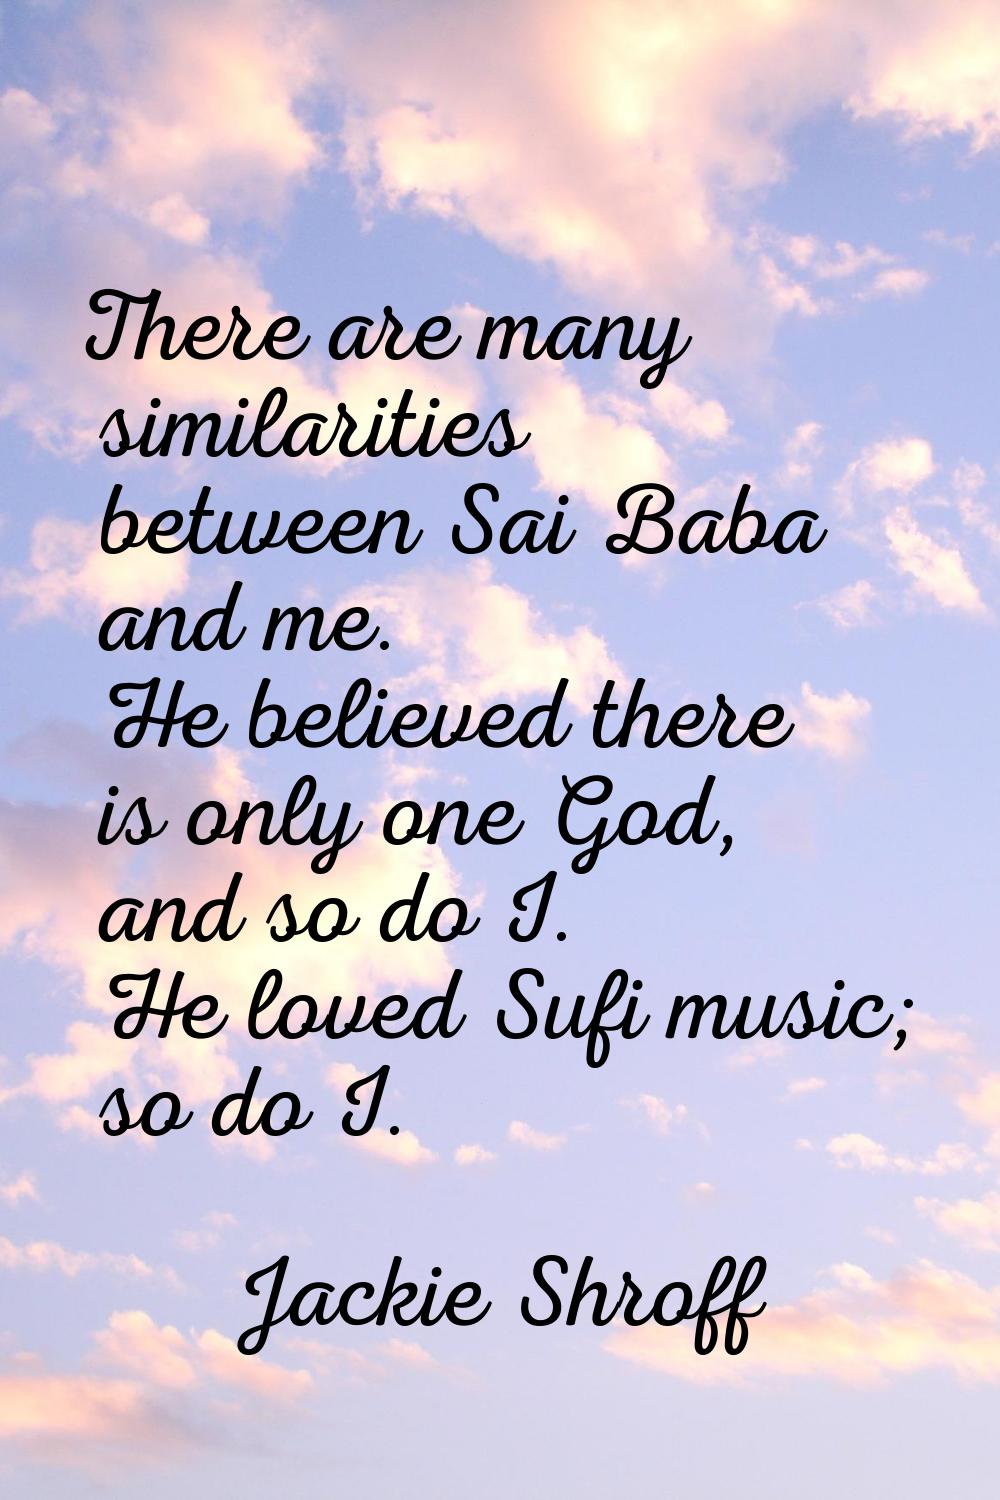 There are many similarities between Sai Baba and me. He believed there is only one God, and so do I